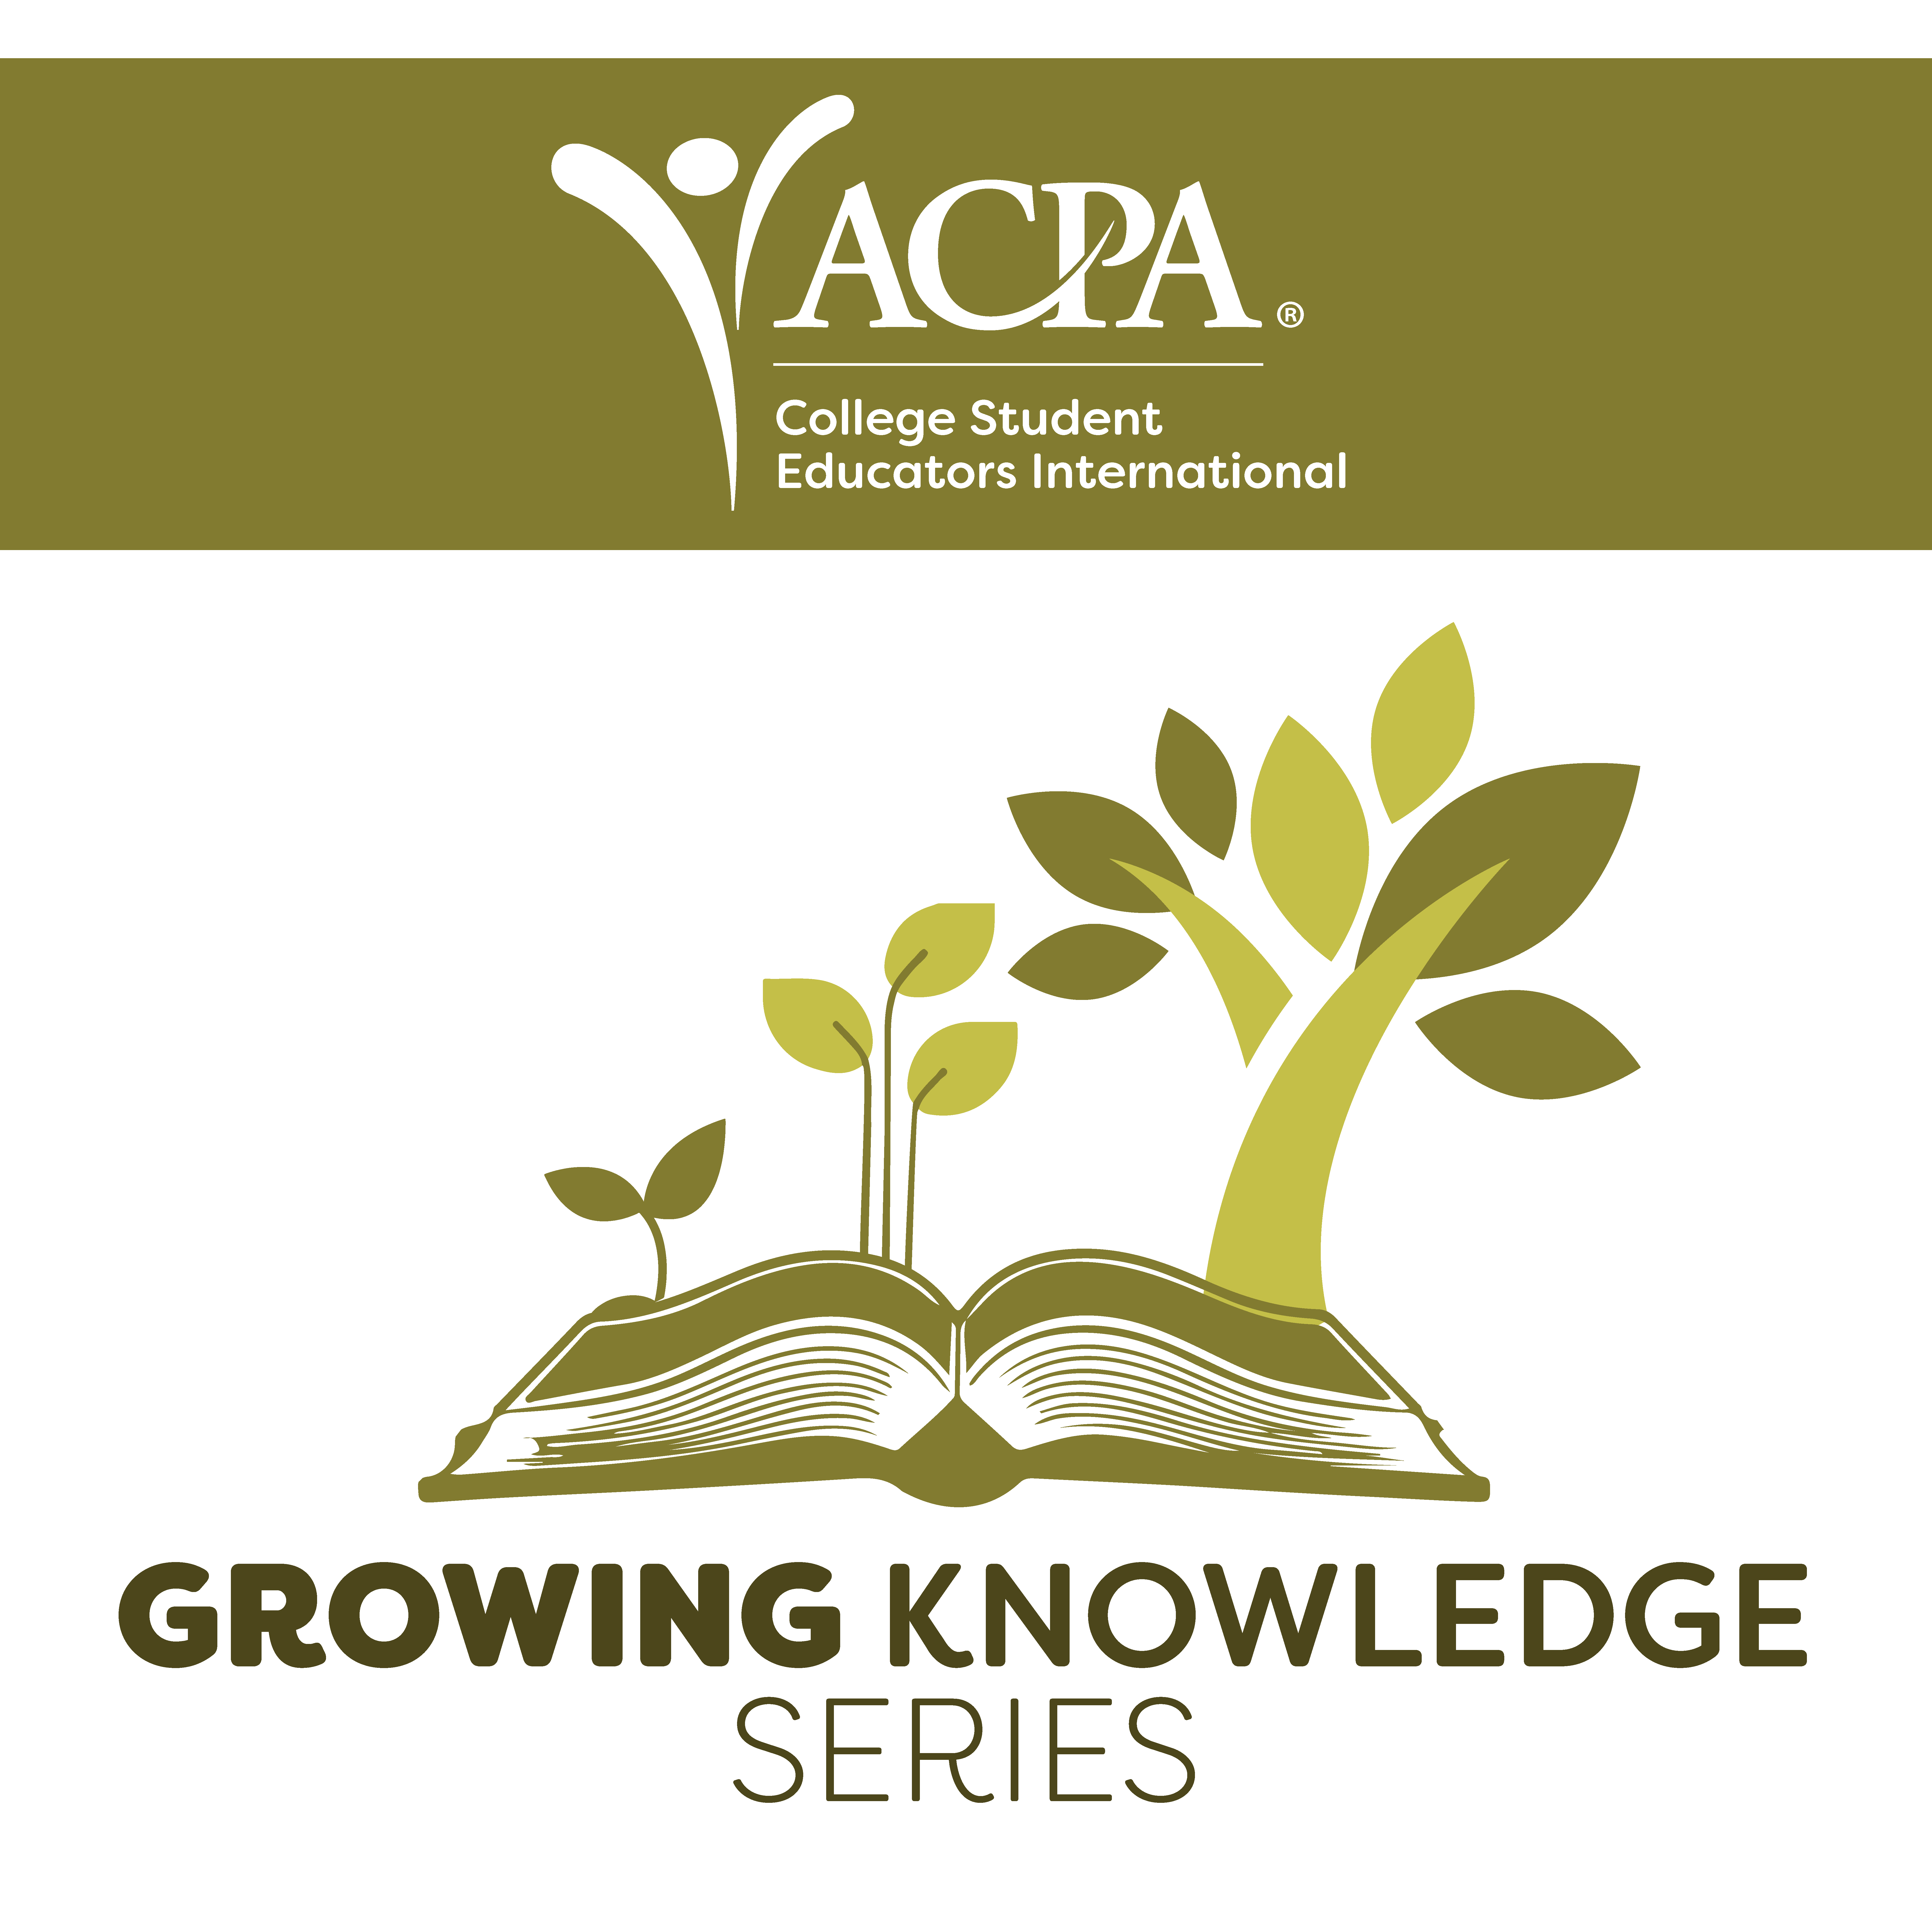 Growing Knowledge Series logo featuring an open book with a sprout, small tree and large tree growing out from from the open book.